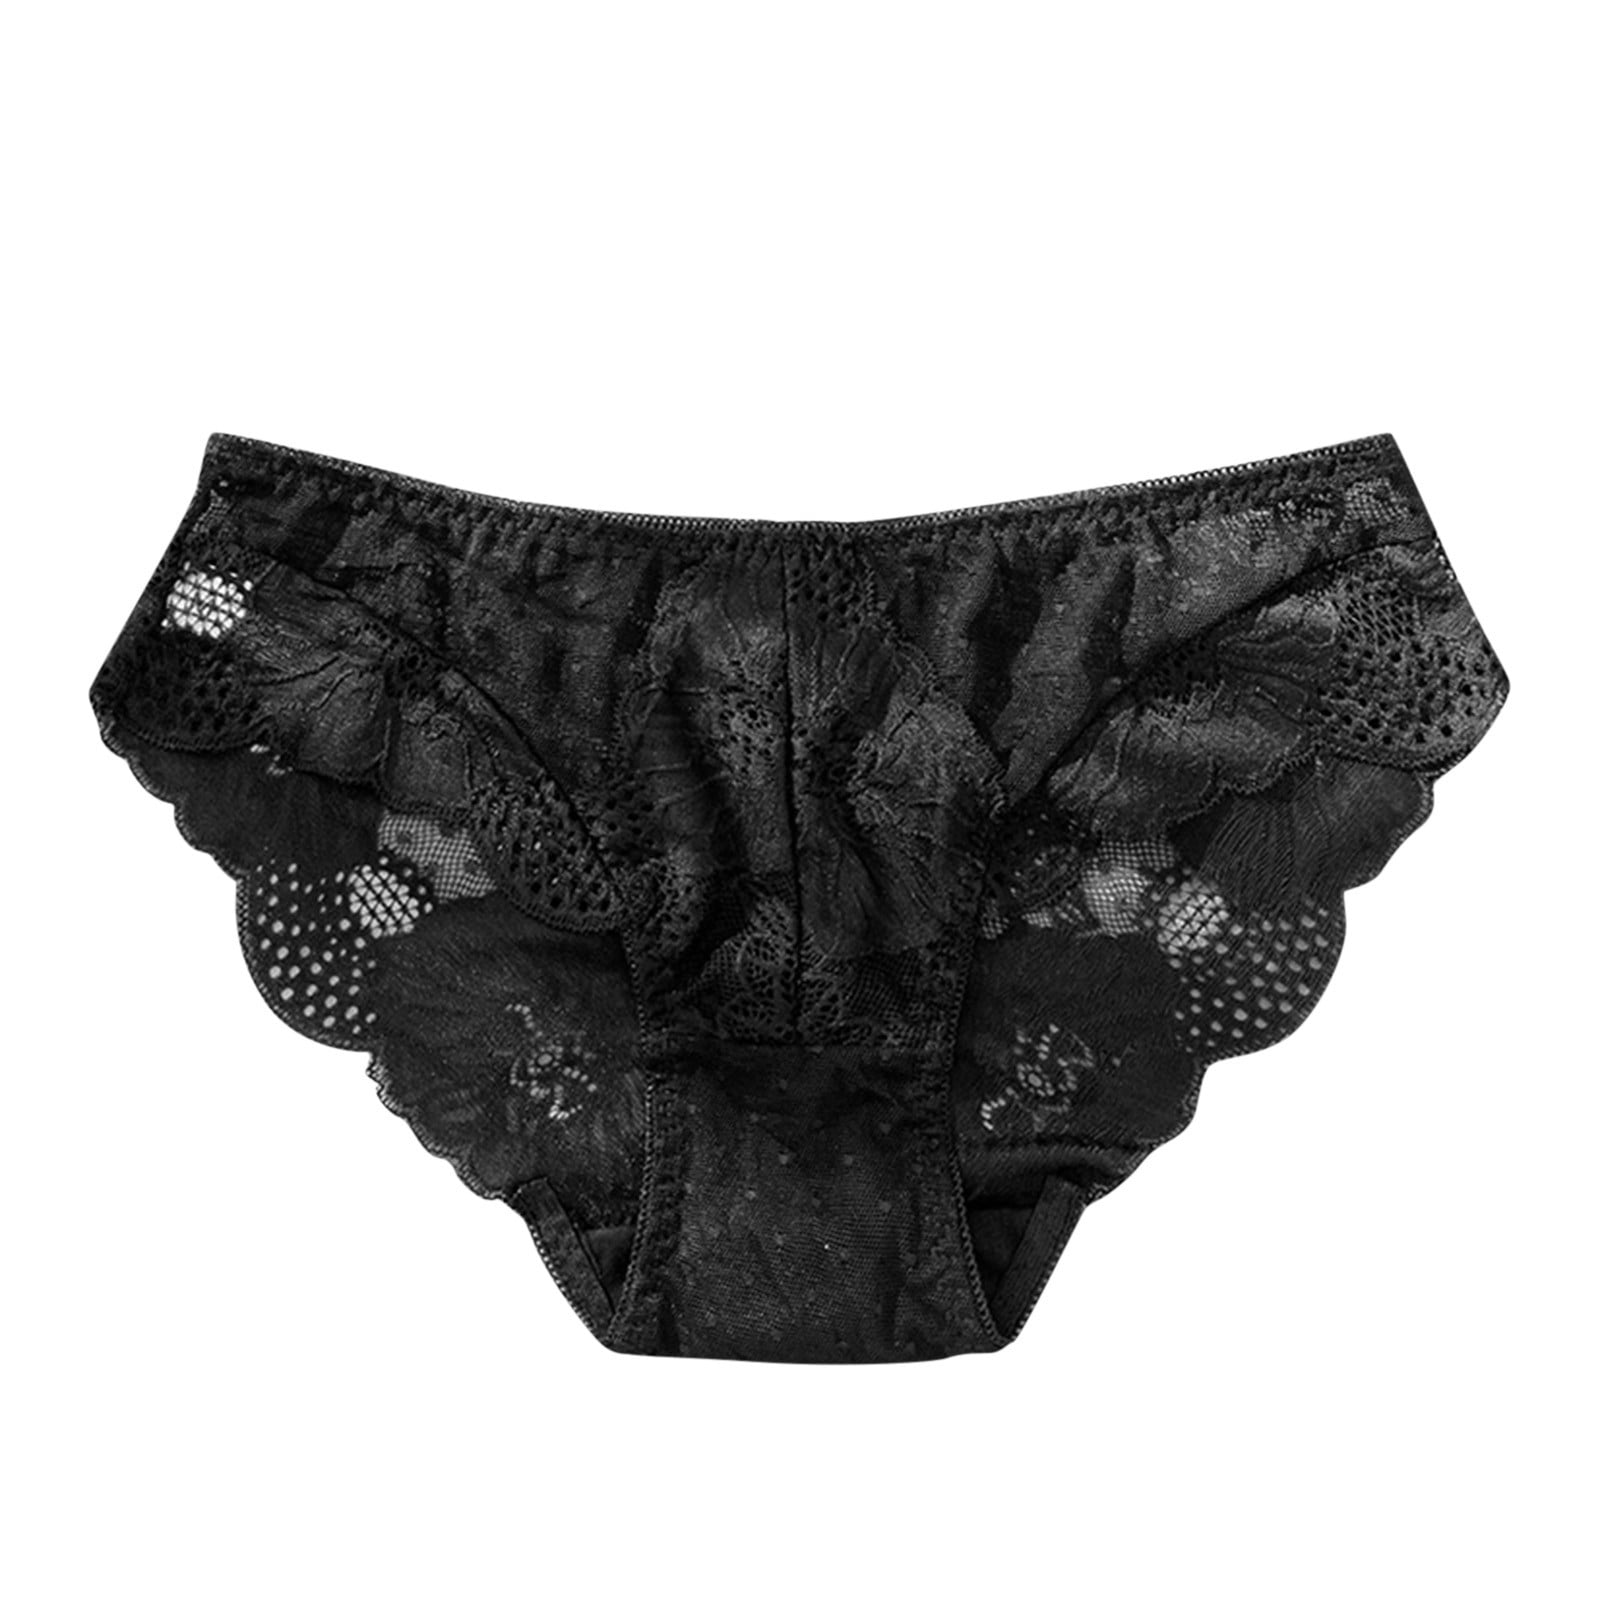 JDEFEG Nylon Granny Panties Women Lace Underwear Breathable Hipster Panties  Stretch Seamless Briefs Plus Size G String For Women 2Xl Lace Black Xl 